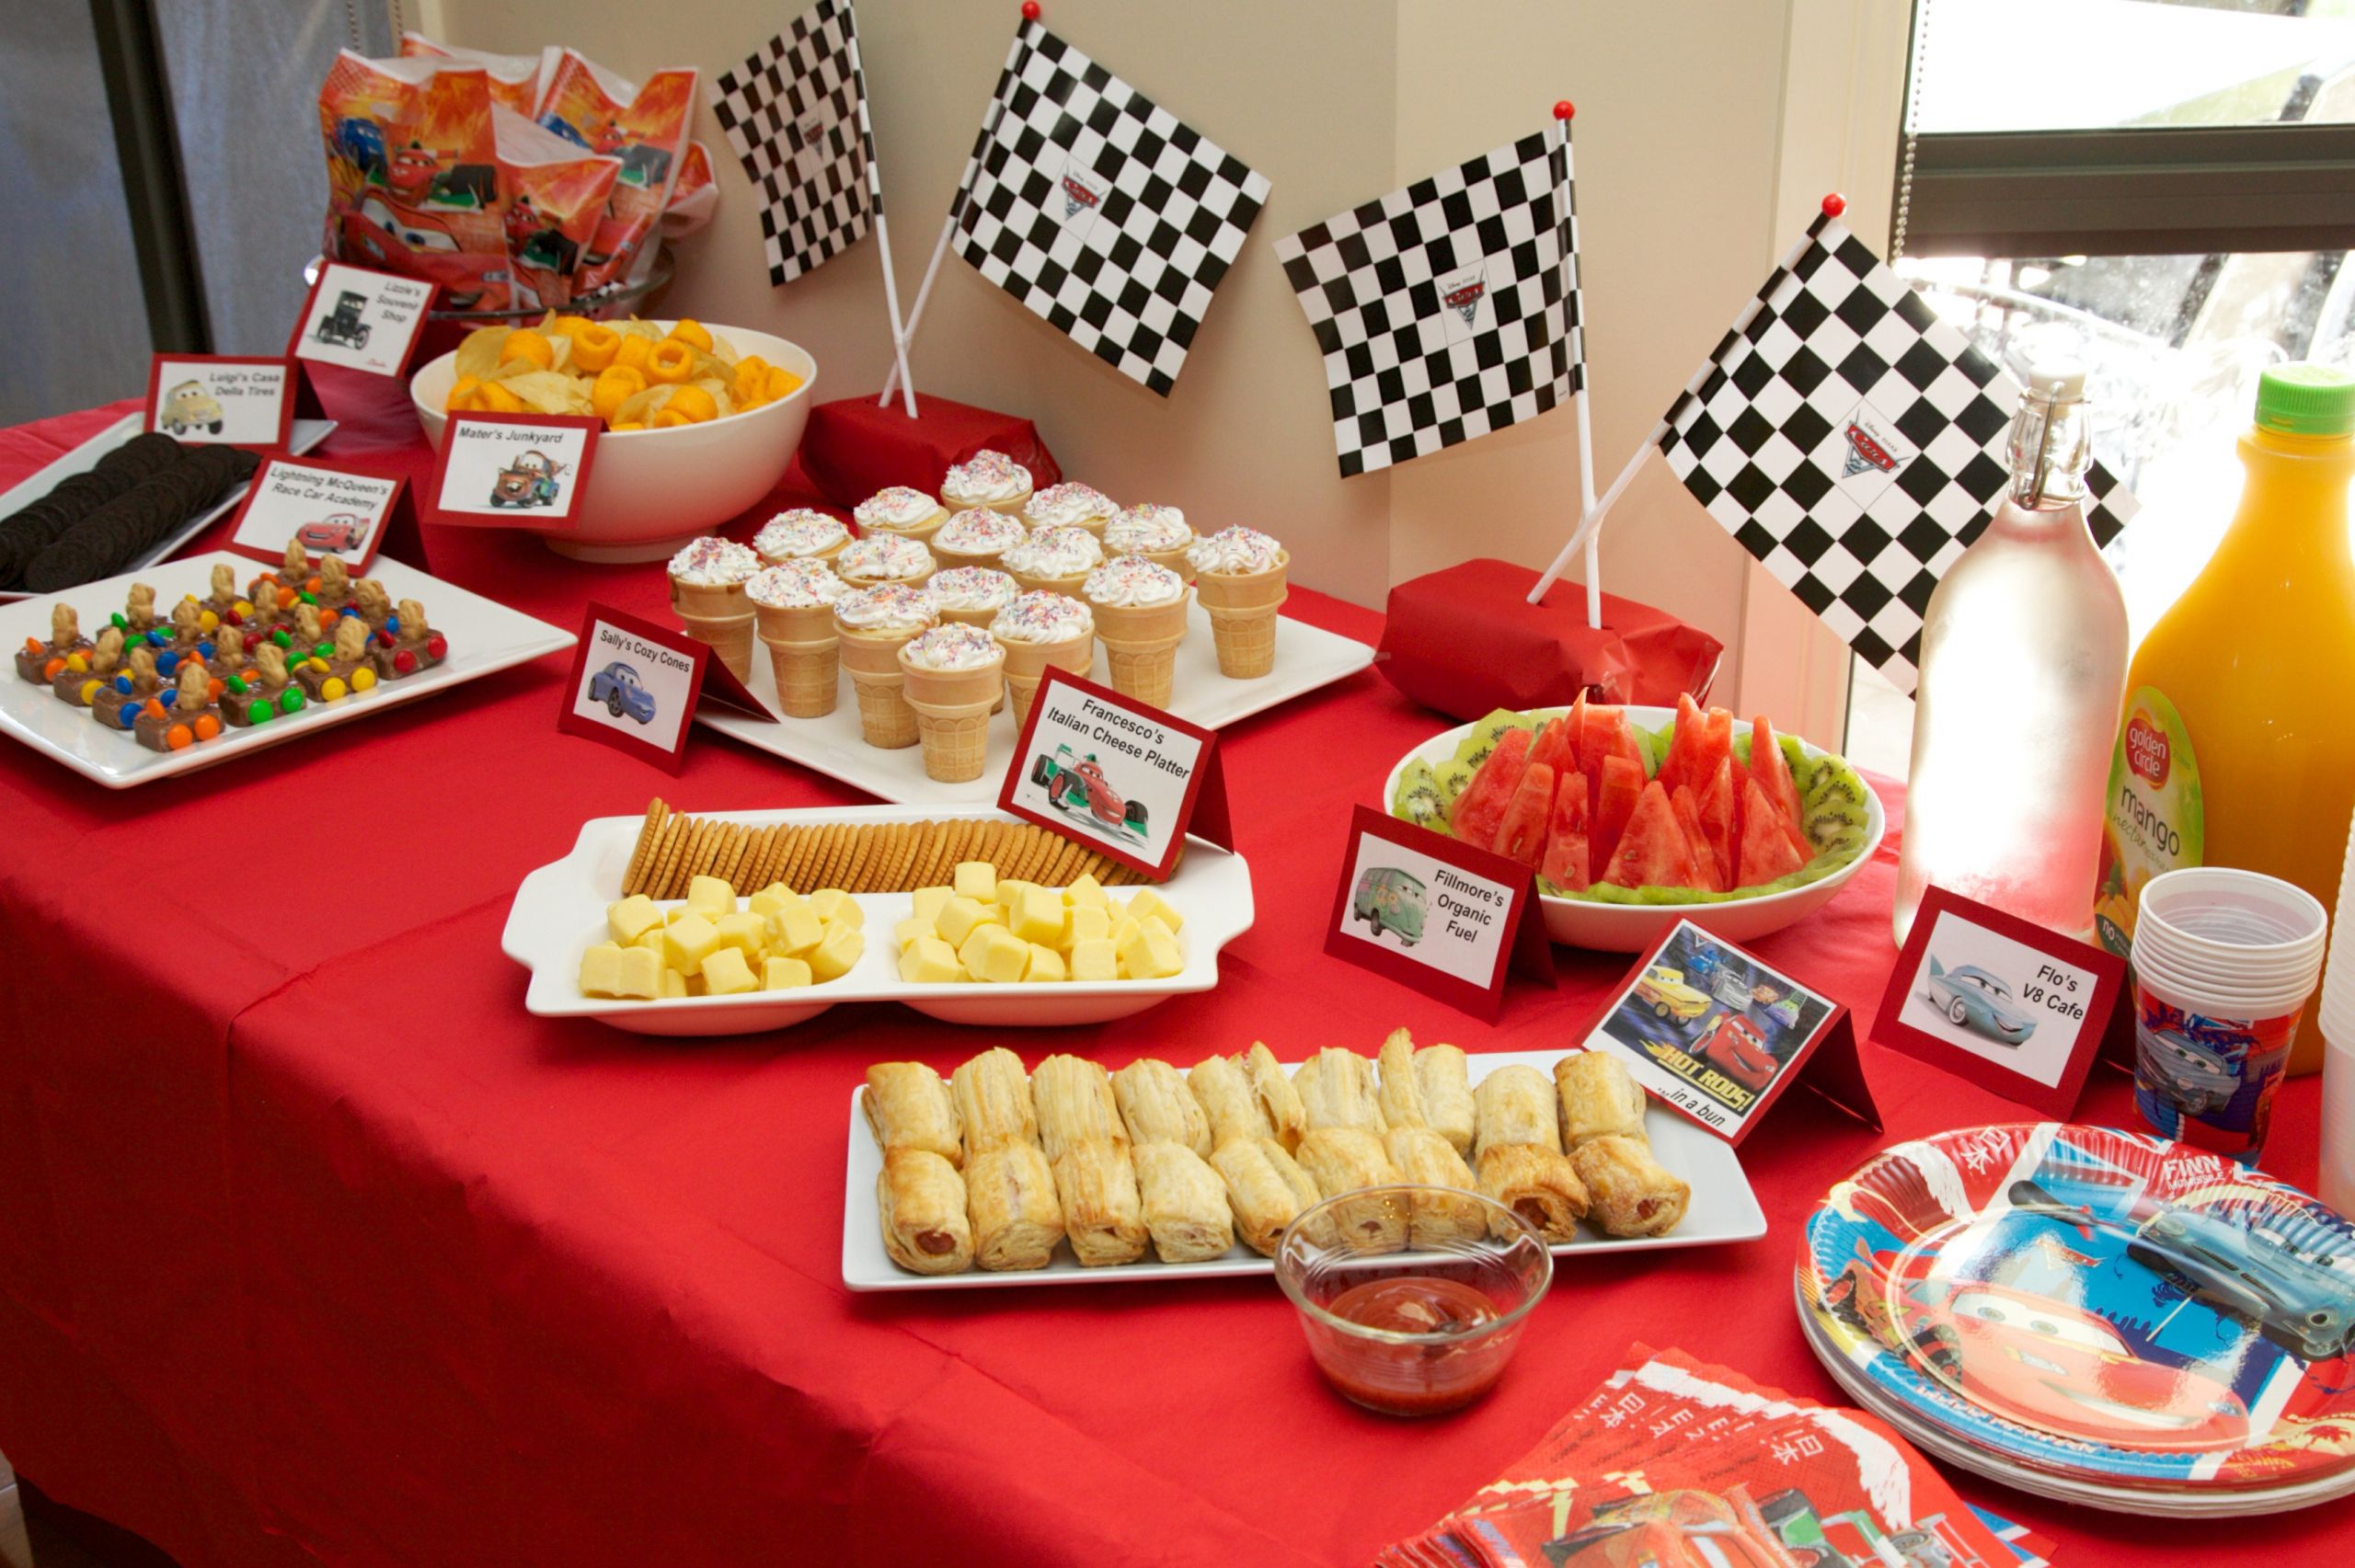 Birthday Party Snack Food Ideas
 How to throw a BIG kids birthday party on a small bud